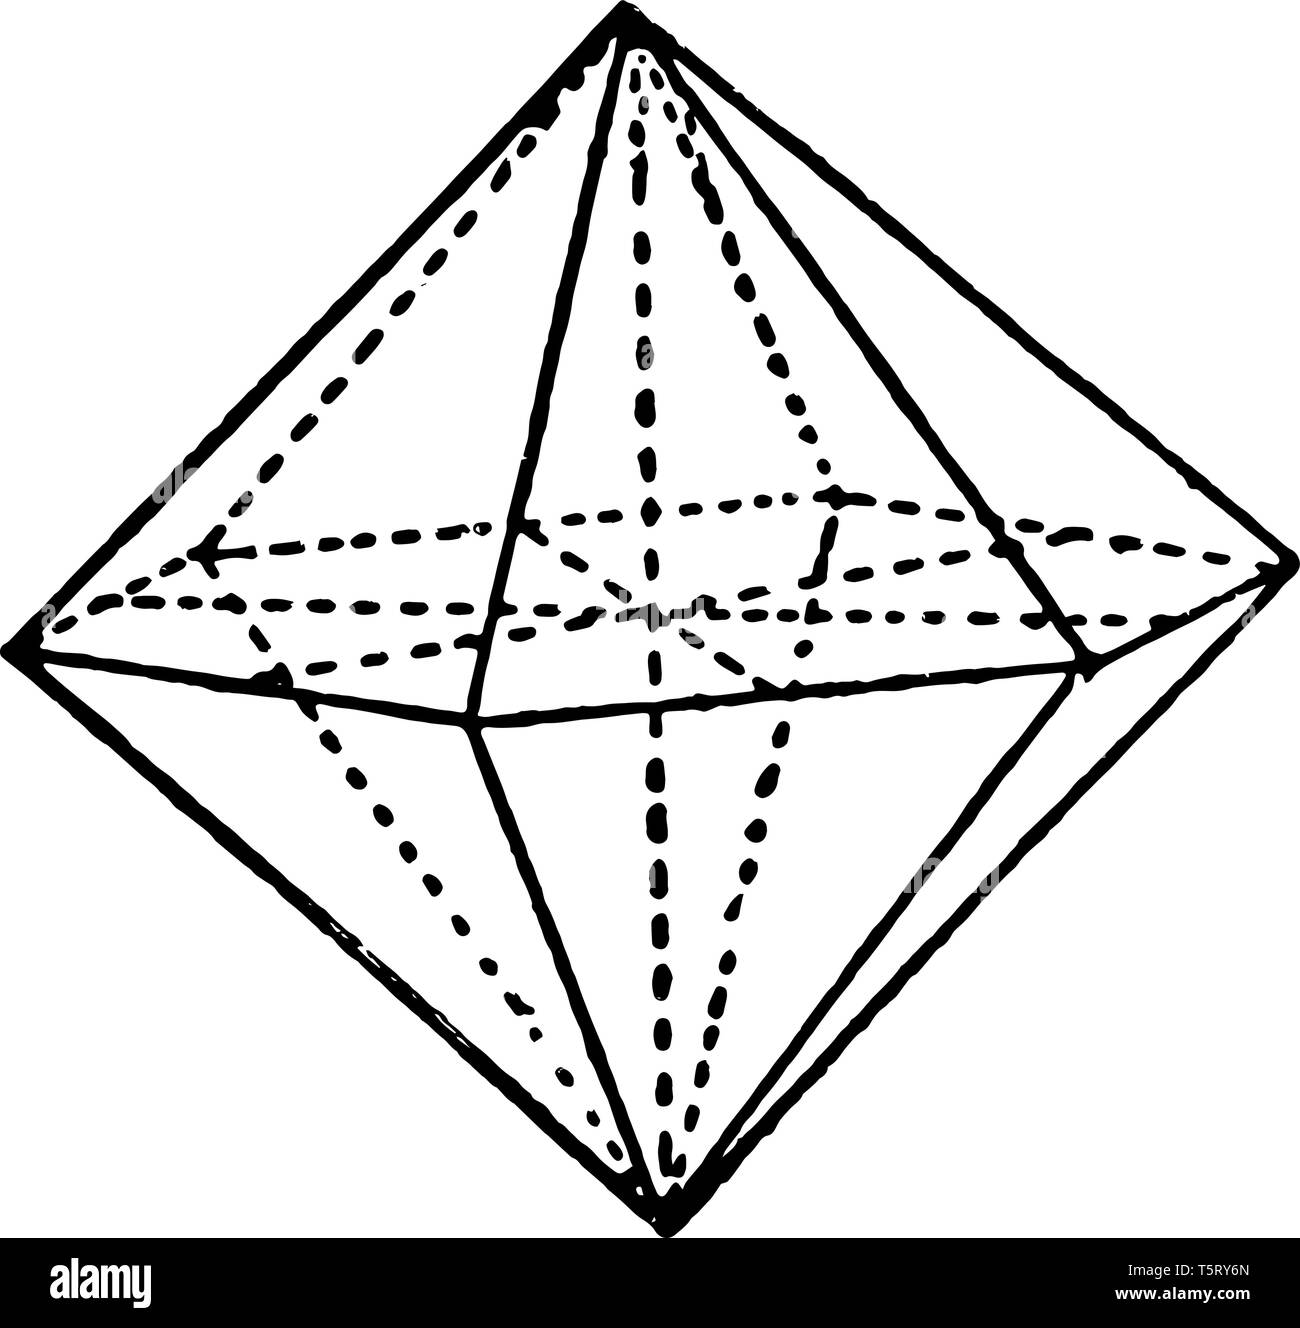 A hexagonal pyramid is a triangular pyramid with a hexagonal face. Both attach pyramid base, vintage line drawing or engraving illustration. Stock Vector